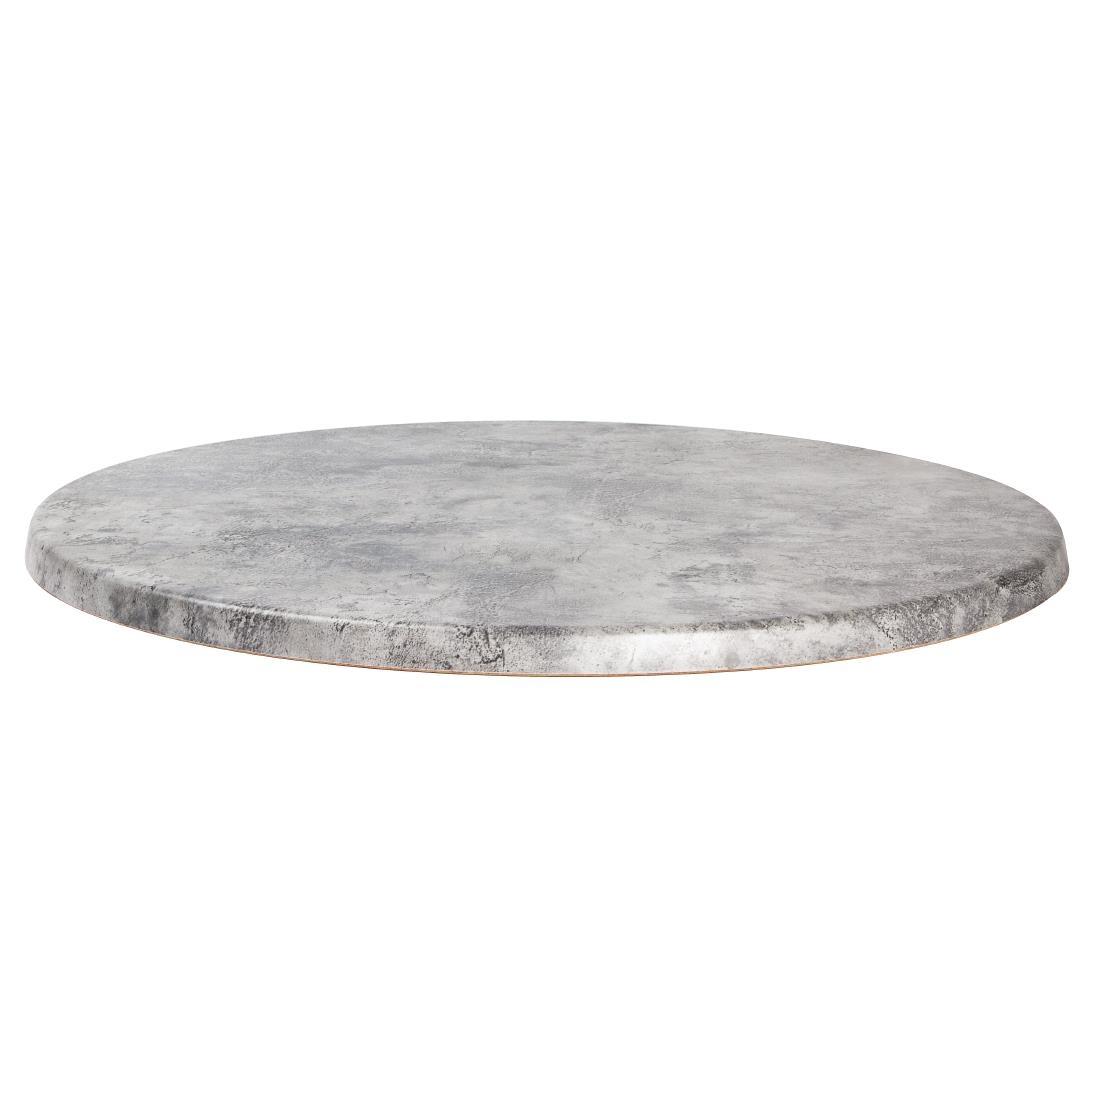 Werzalit Pre-Drilled Round Table Top Concrete 600mm - GM420  - 2